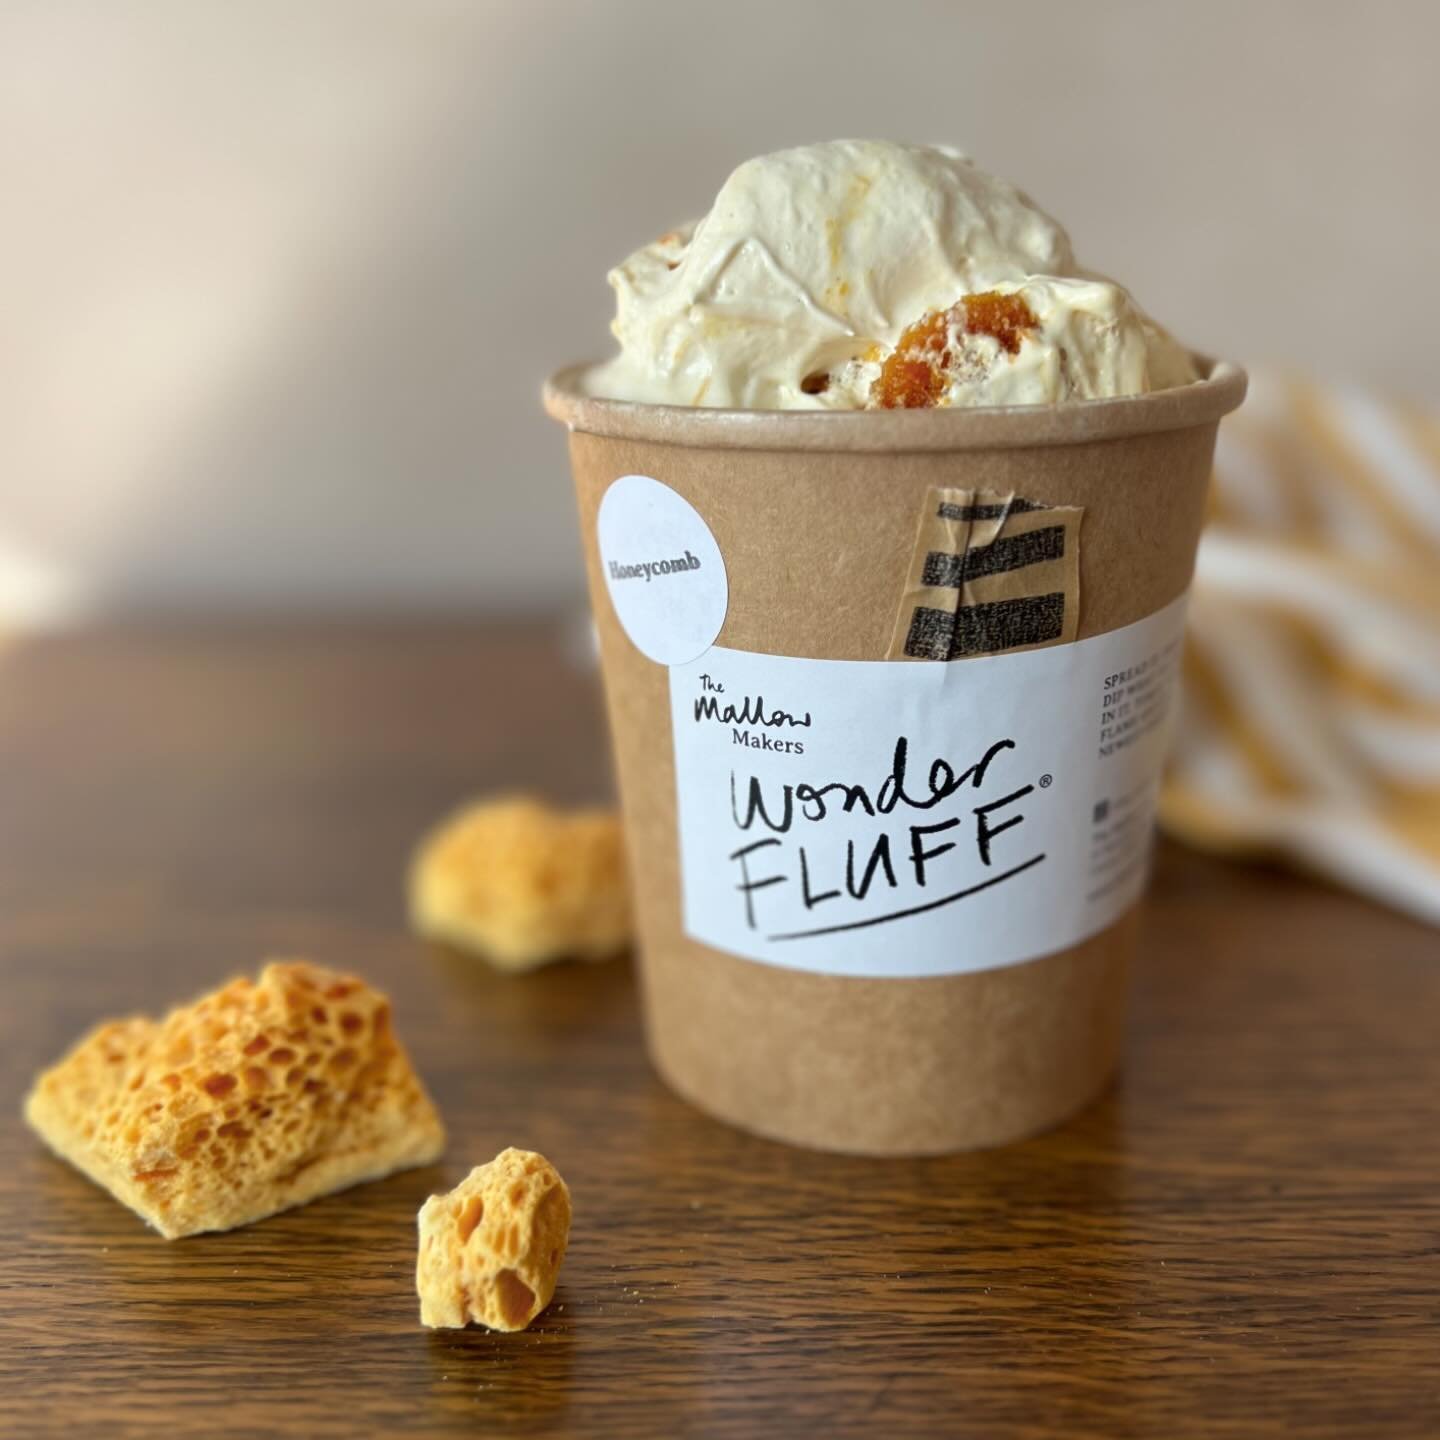 Have you tasted the newest Wonder Fluff flavour? Our silky Vanilla Wonder Fluff is studded with crumbly house made honeycomb. As the golden chunks dissolve they leave a trail of intensely flavoured caramel ribboned through every mouthful.

Absolutely